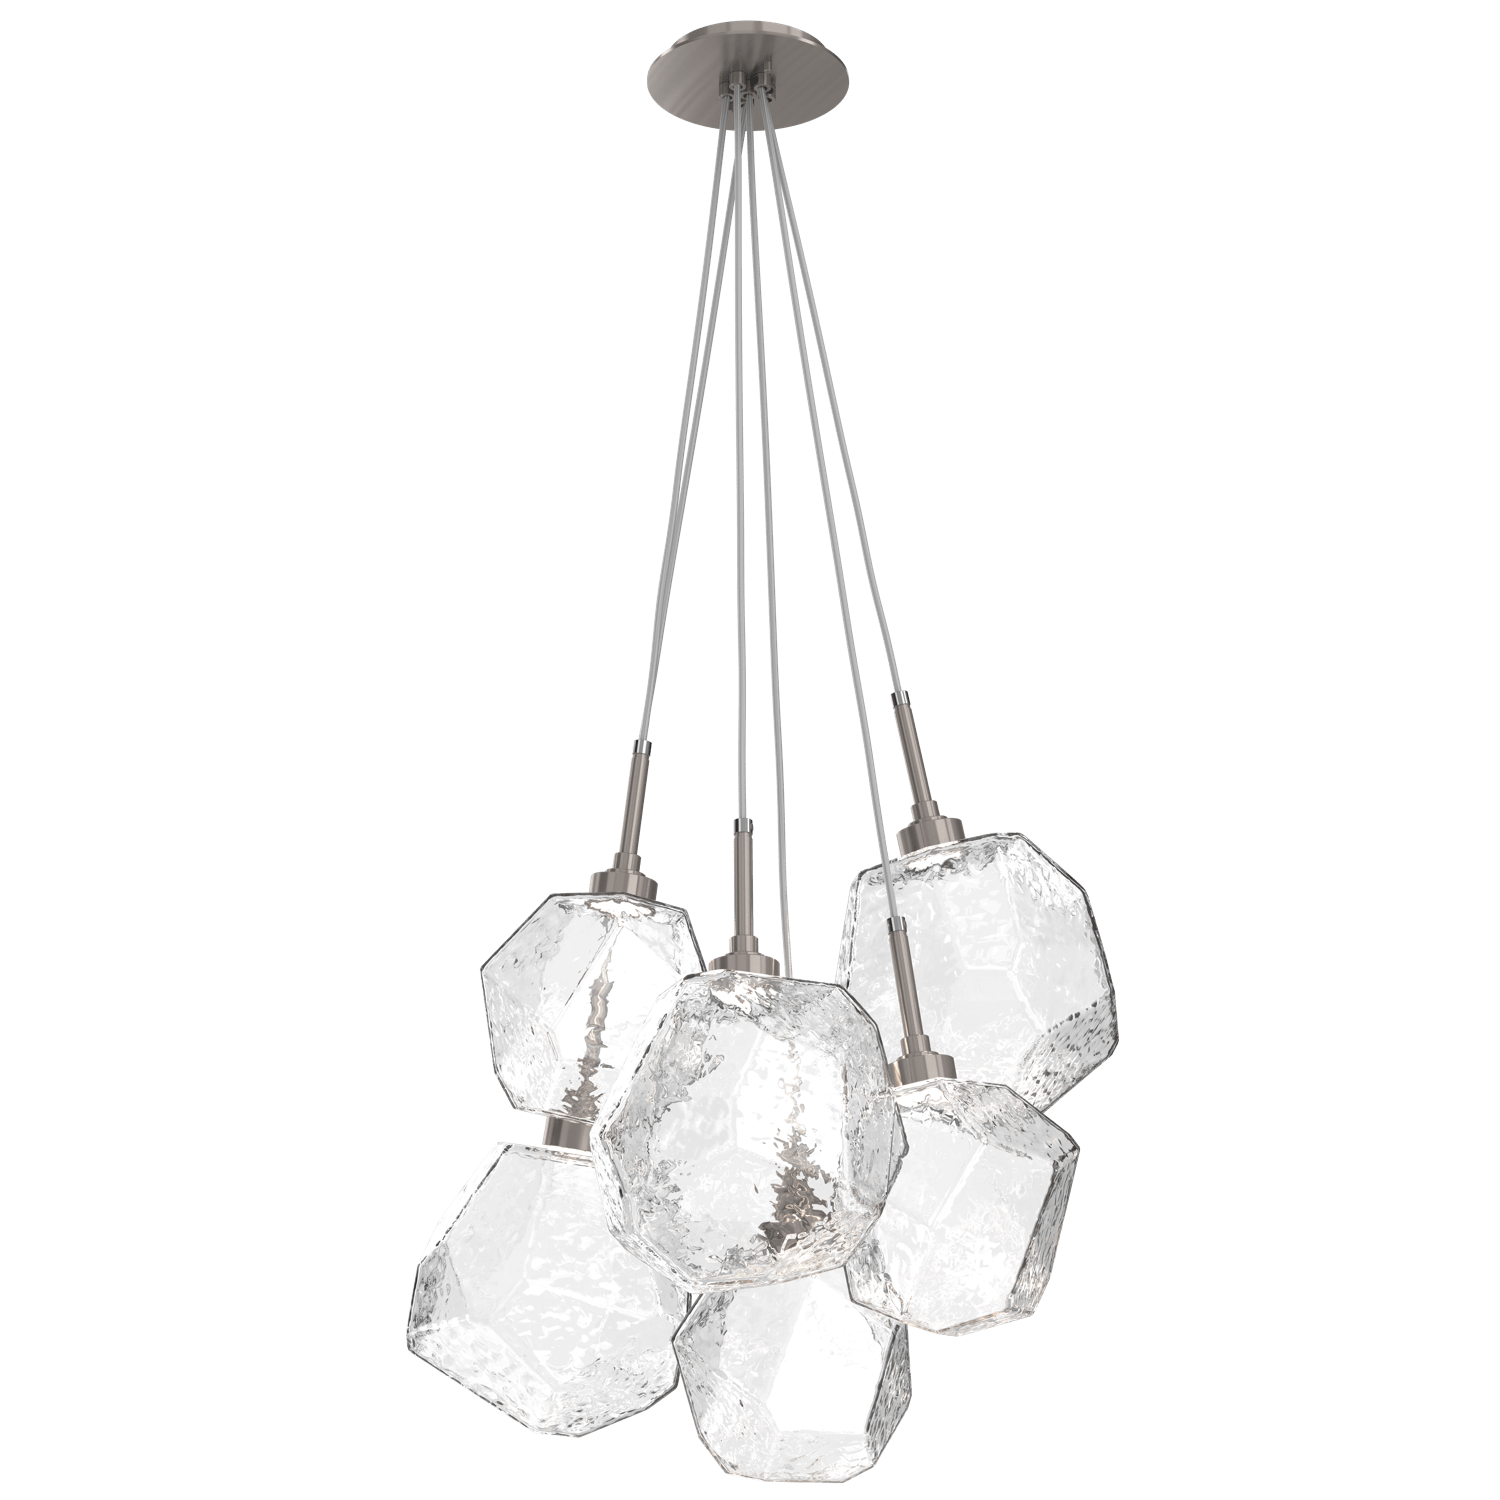 CHB0039-0F-GM-C-Hammerton-Studio-Gem-6-light-cluster-pendant-light-with-gunmetal-finish-and-clear-blown-glass-shades-and-LED-lamping